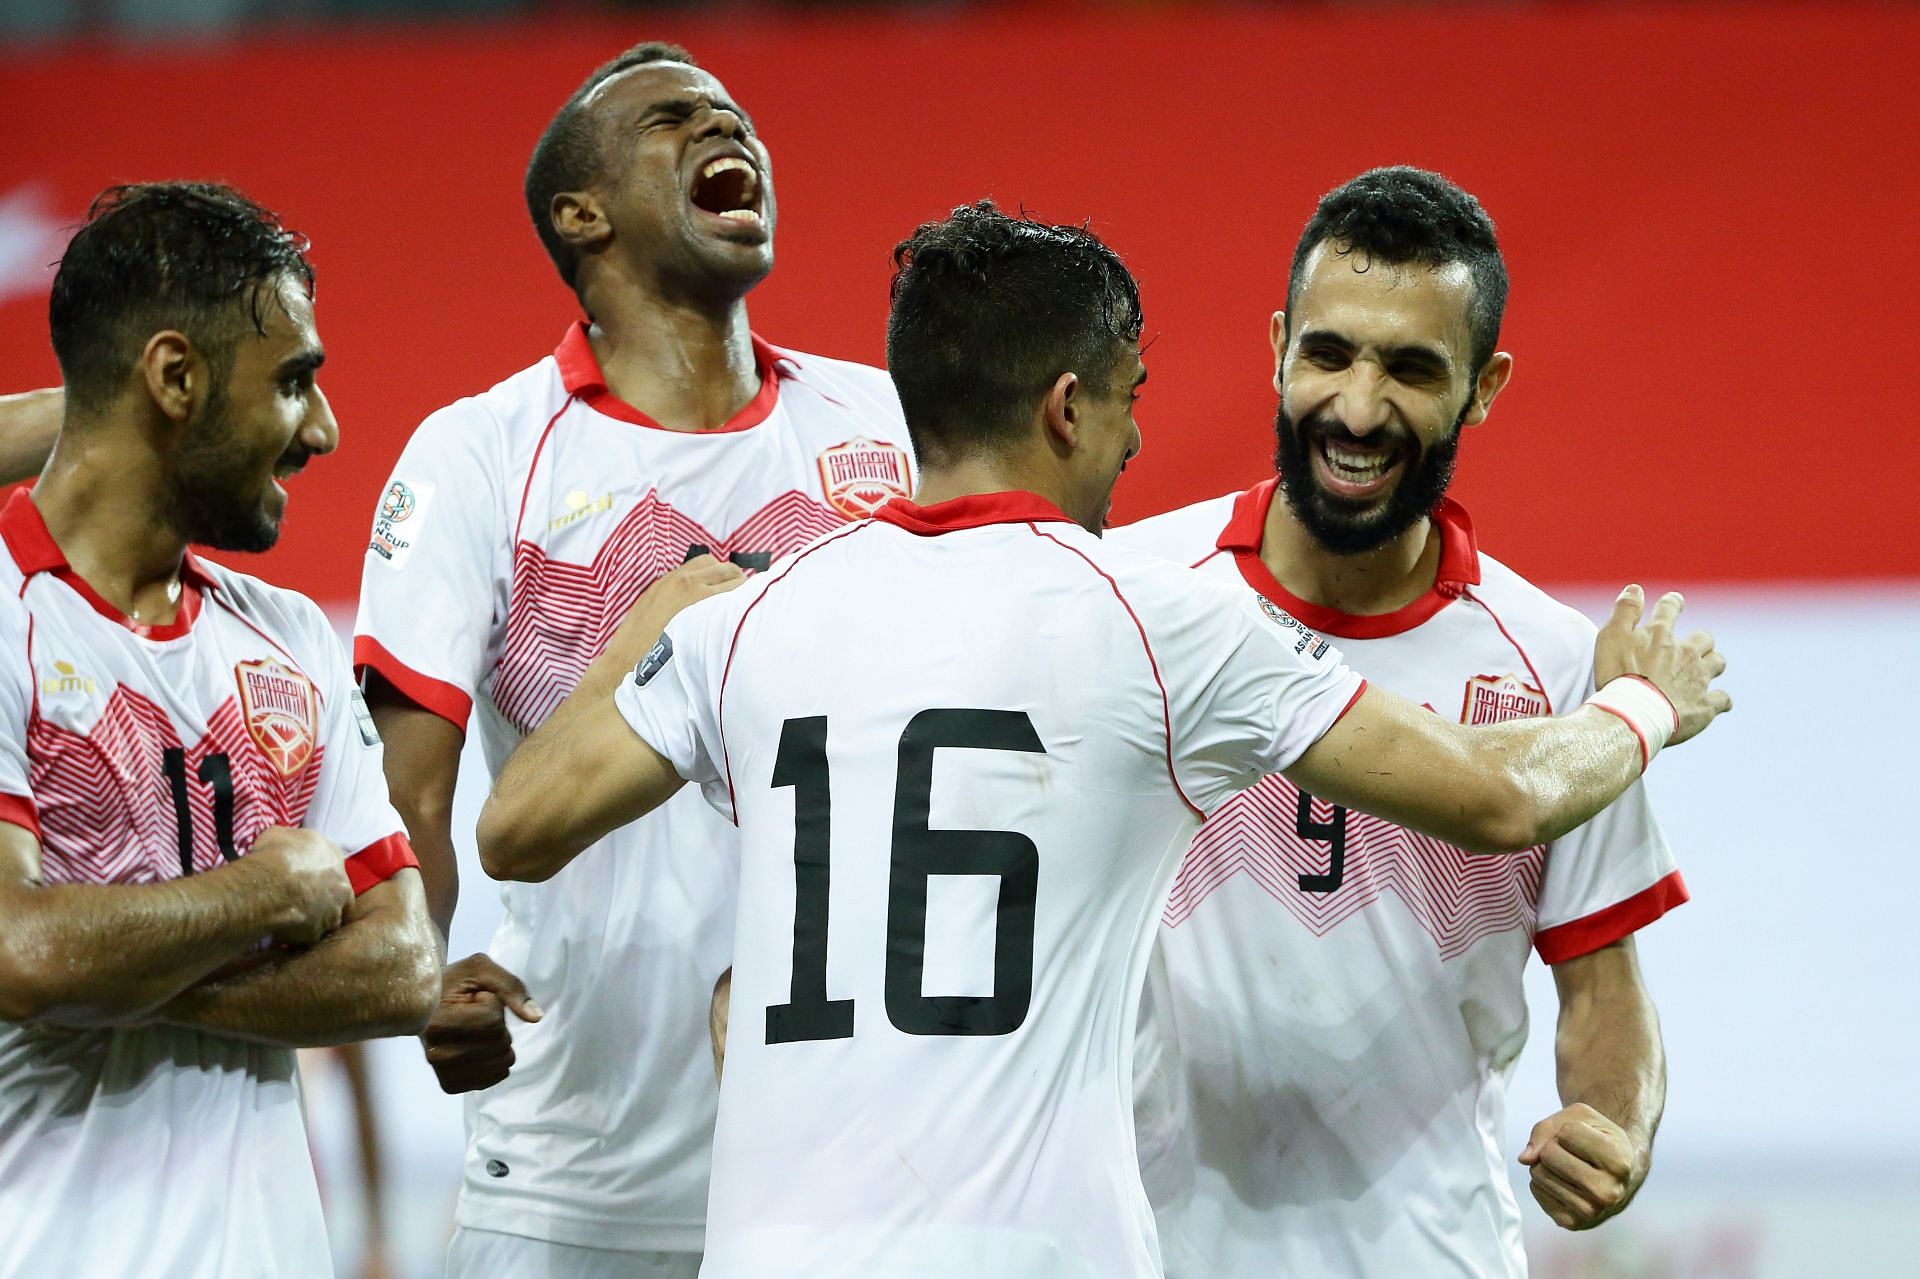 Bahrain haven&#039;t lost to Malaysia in over 40 years